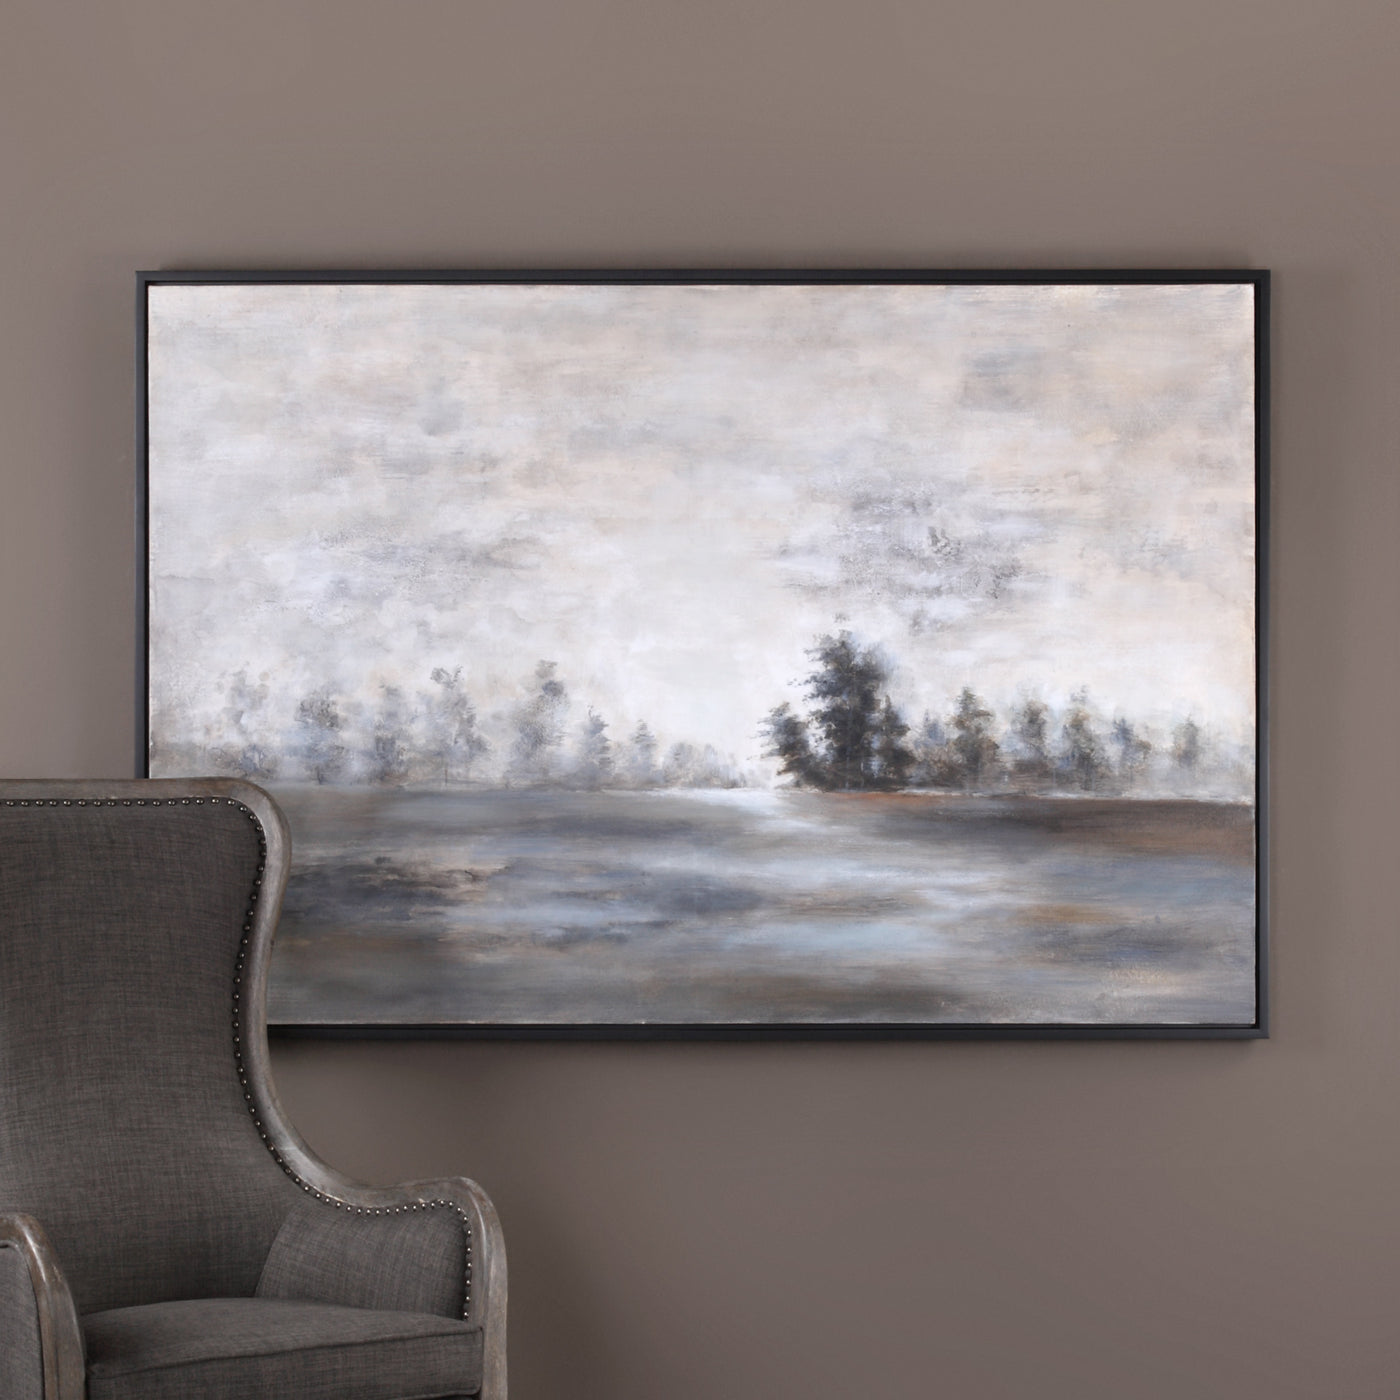 Moody Shades Of Gray, Green, And Charcoal Comprise This Masculine, Hand Painted Landscape. A Peaceful Quality Emanates Fro...